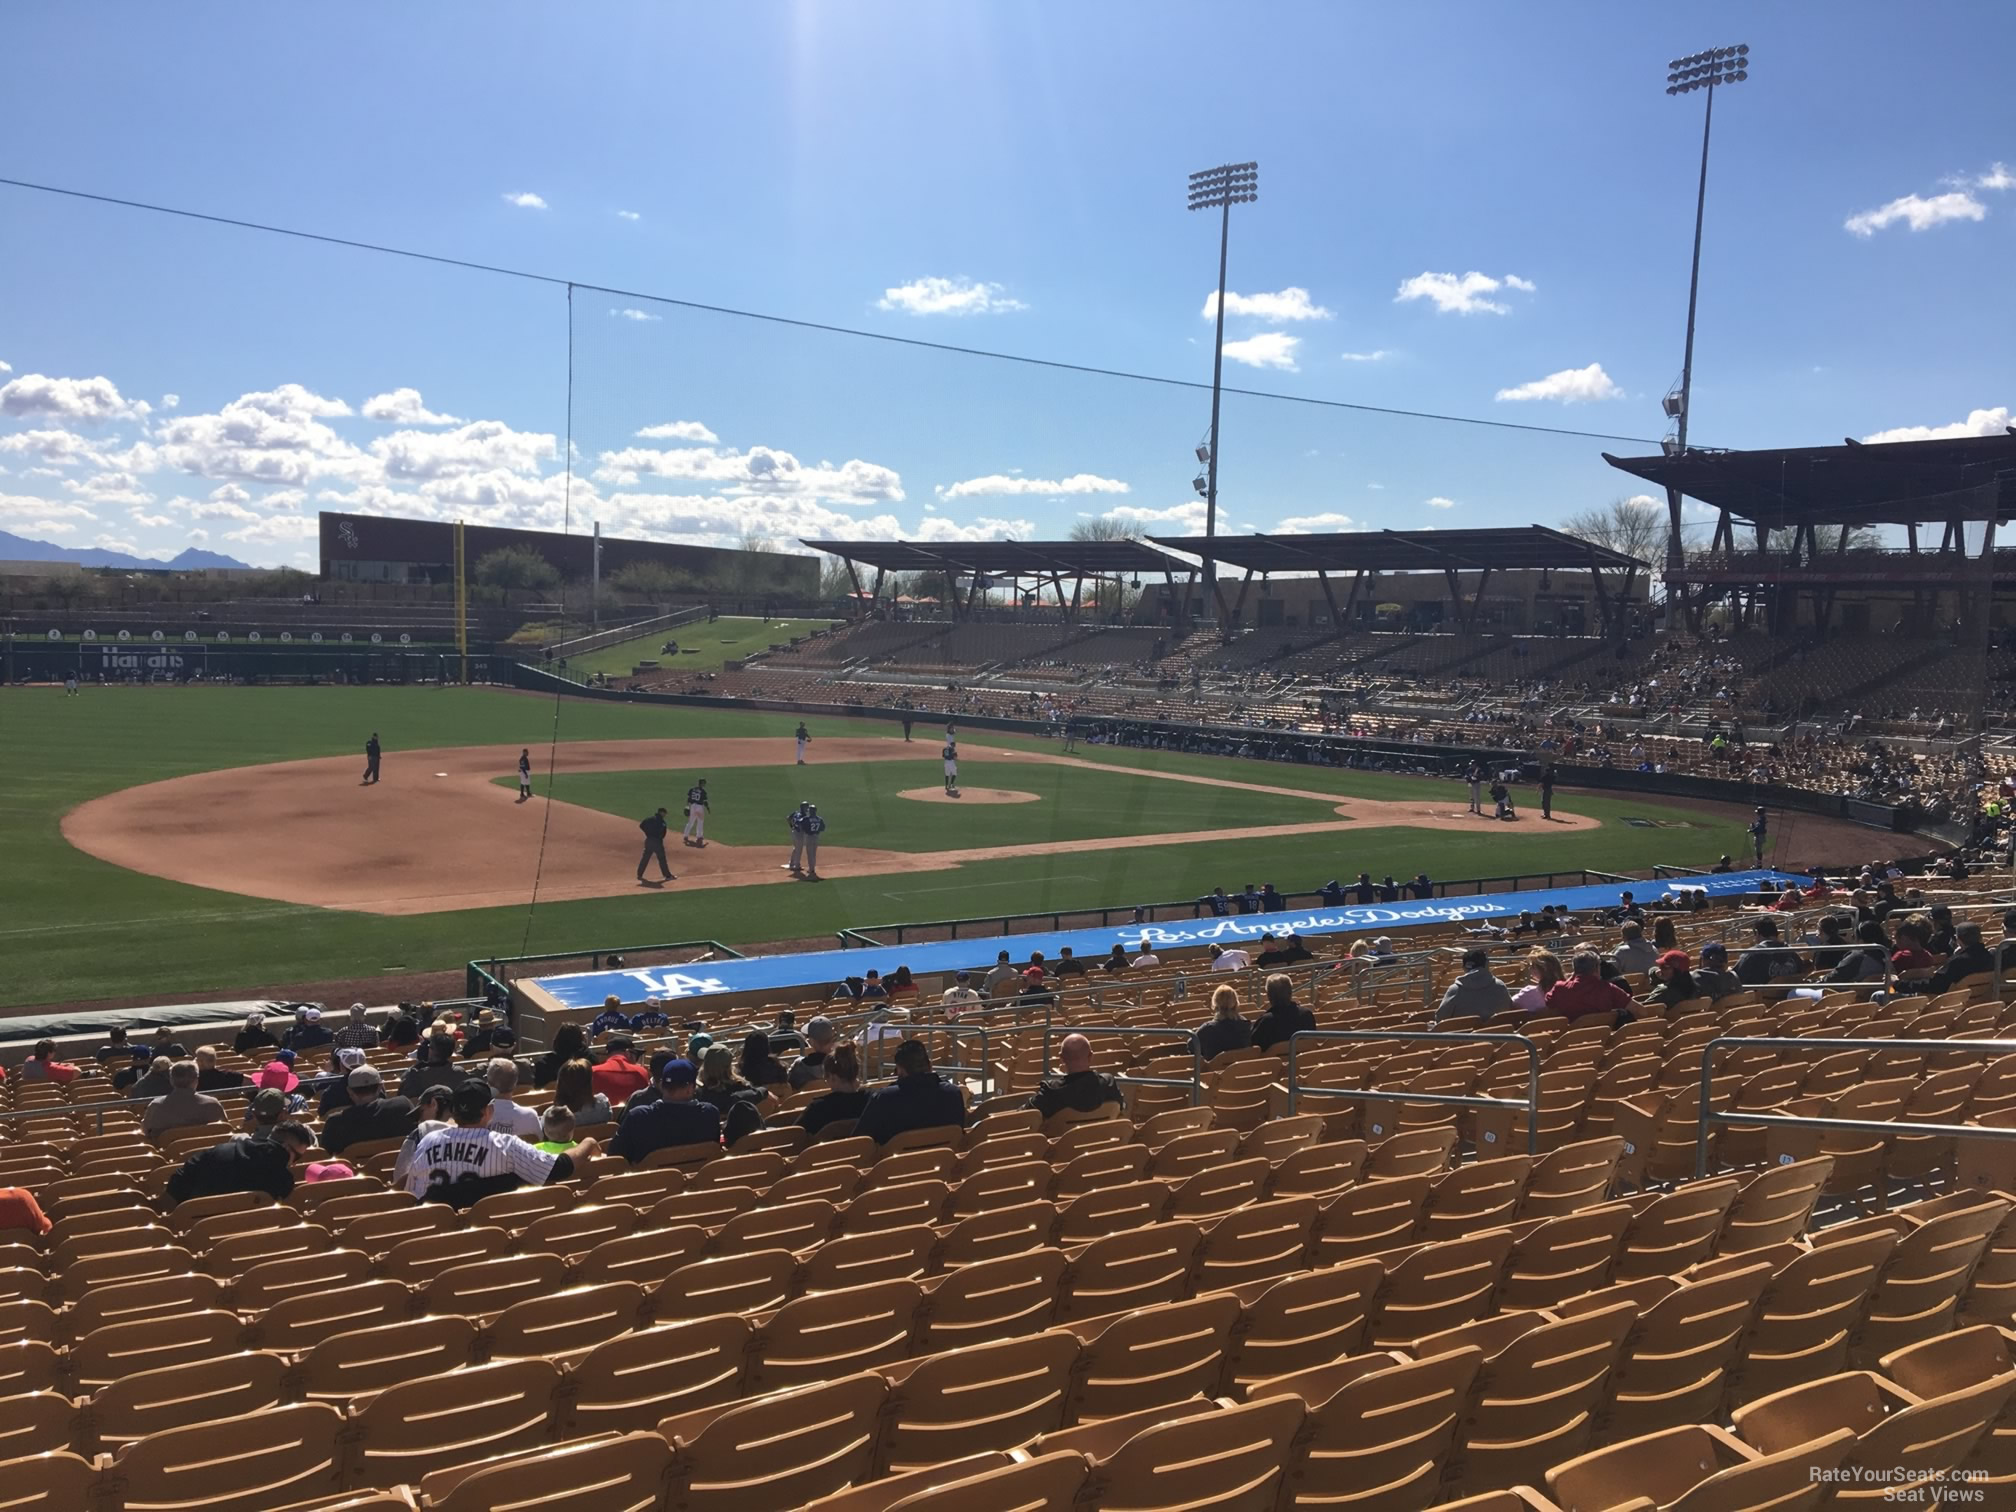 section 125, row 19 seat view  - camelback ranch